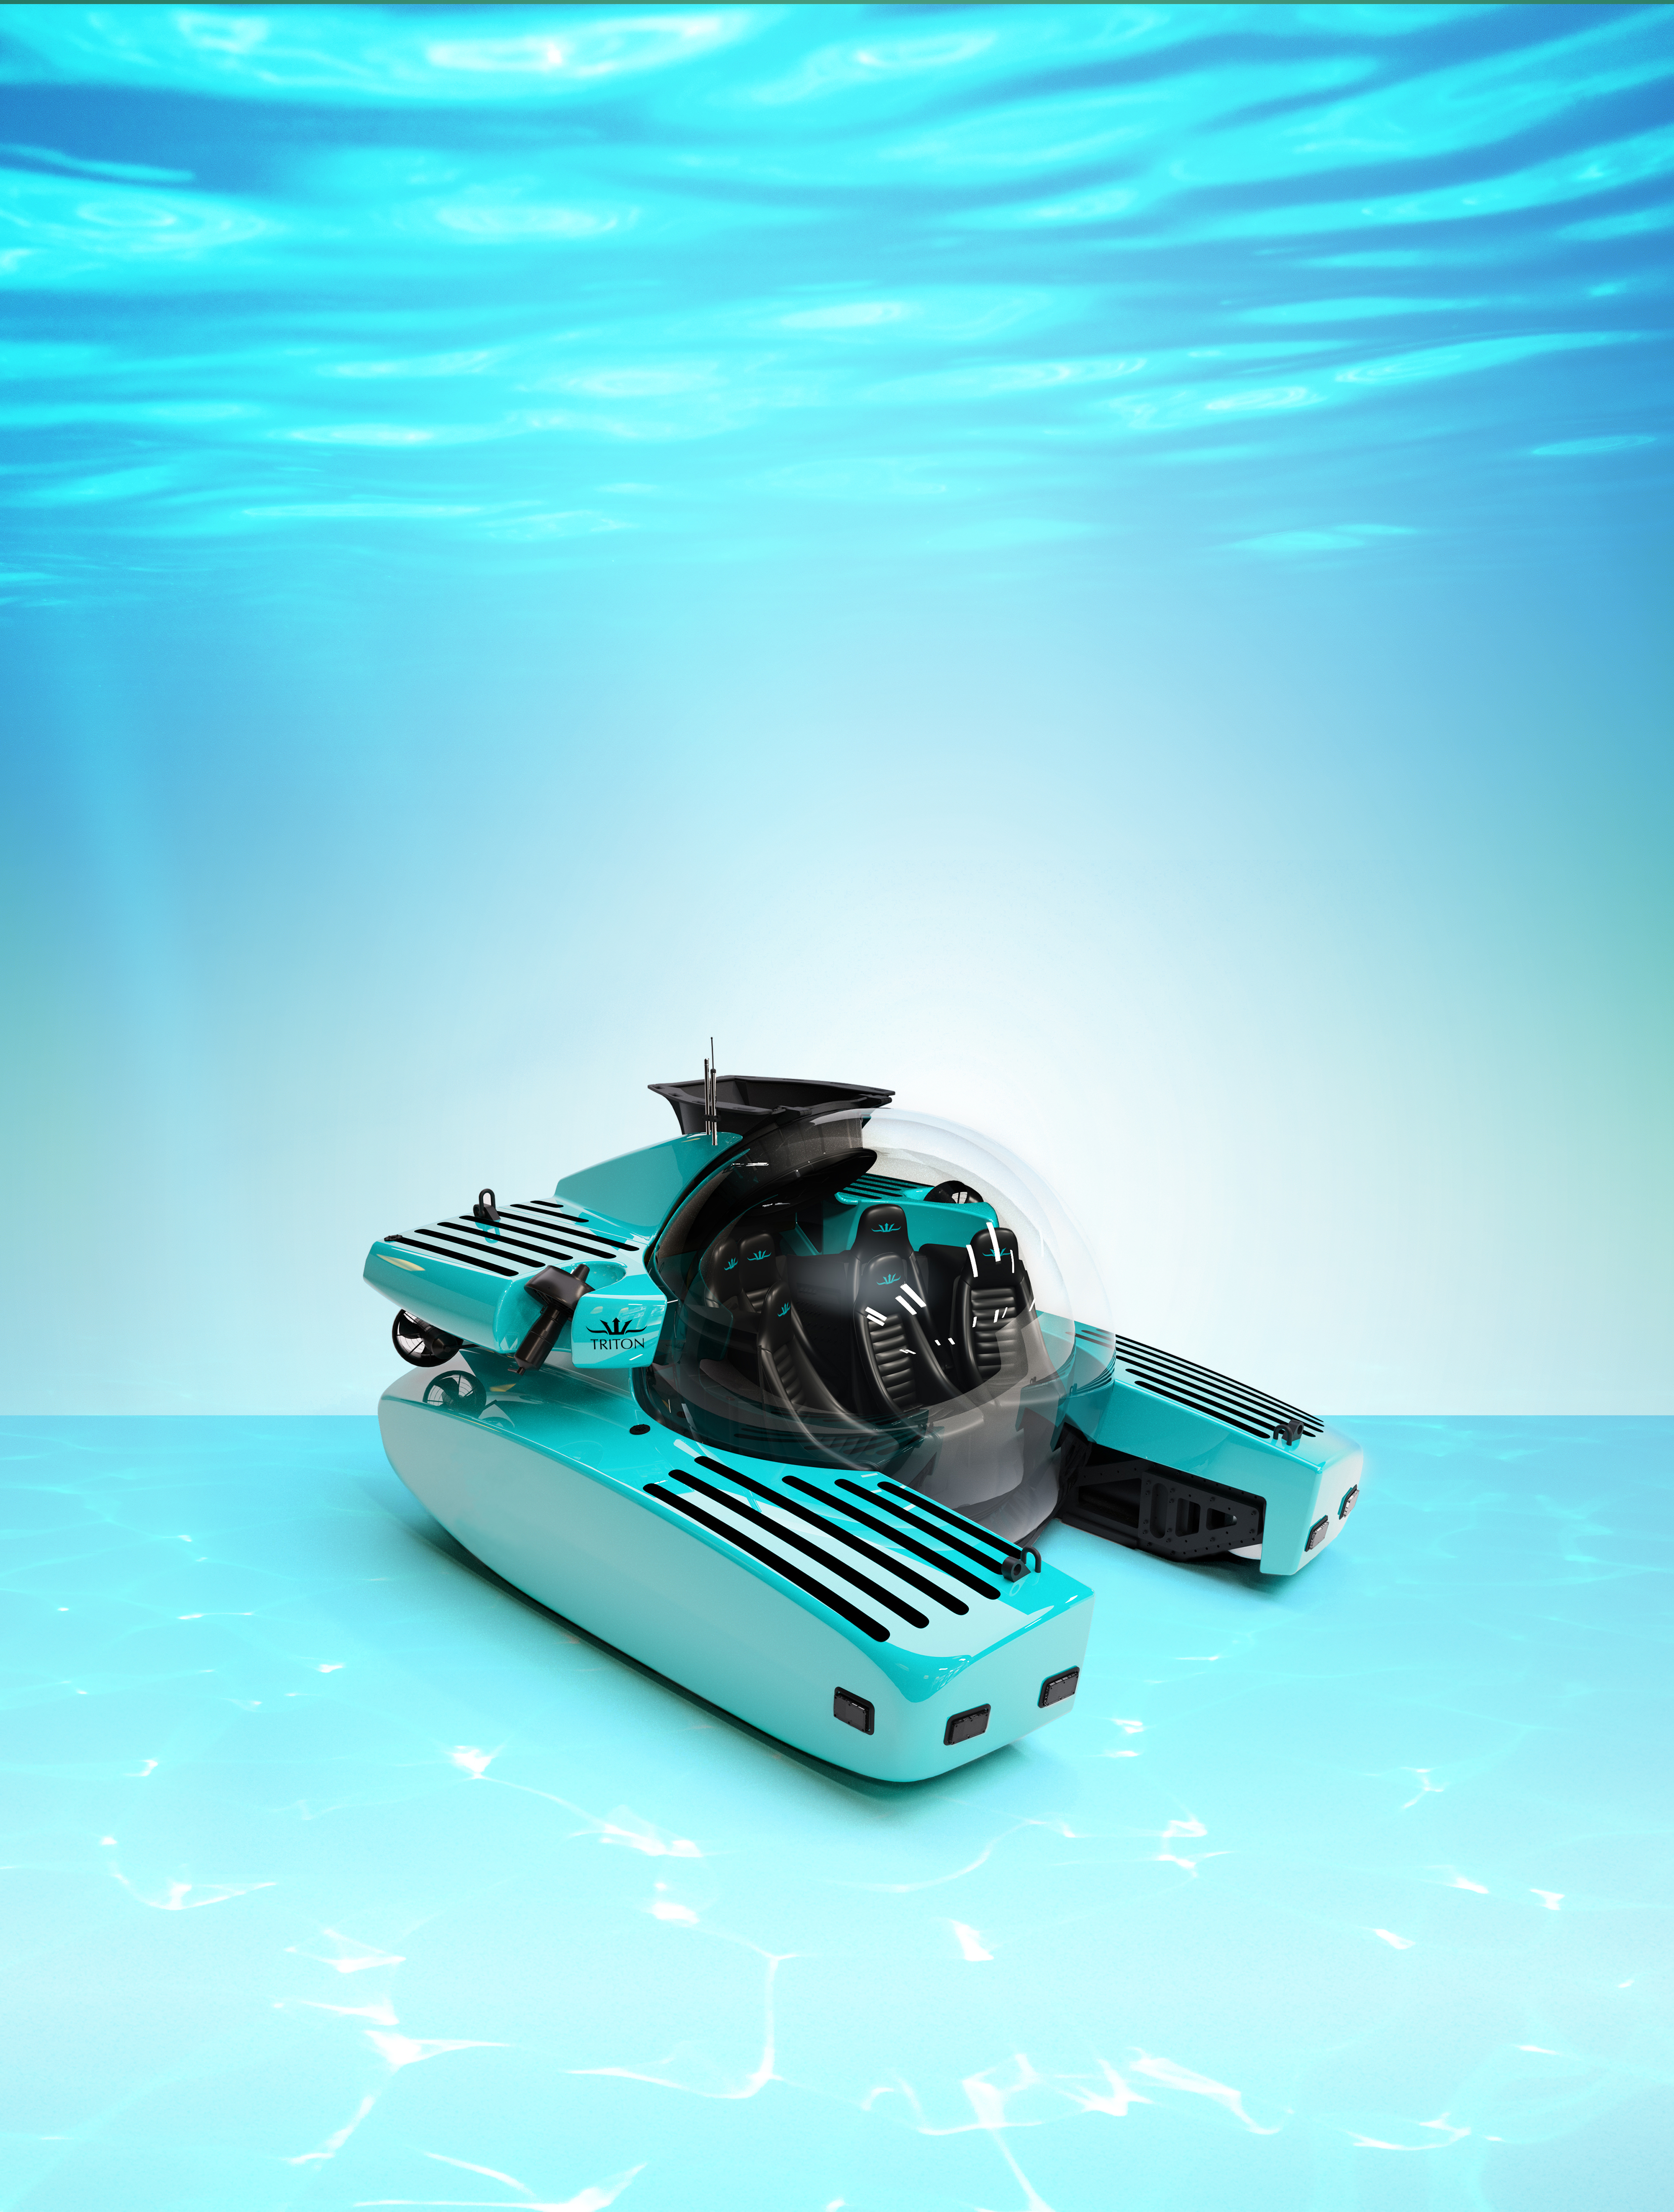 The first Triton 3300/6, a six-seat personal submarine, in Tiffany Blue. Photo: Nick Verola
